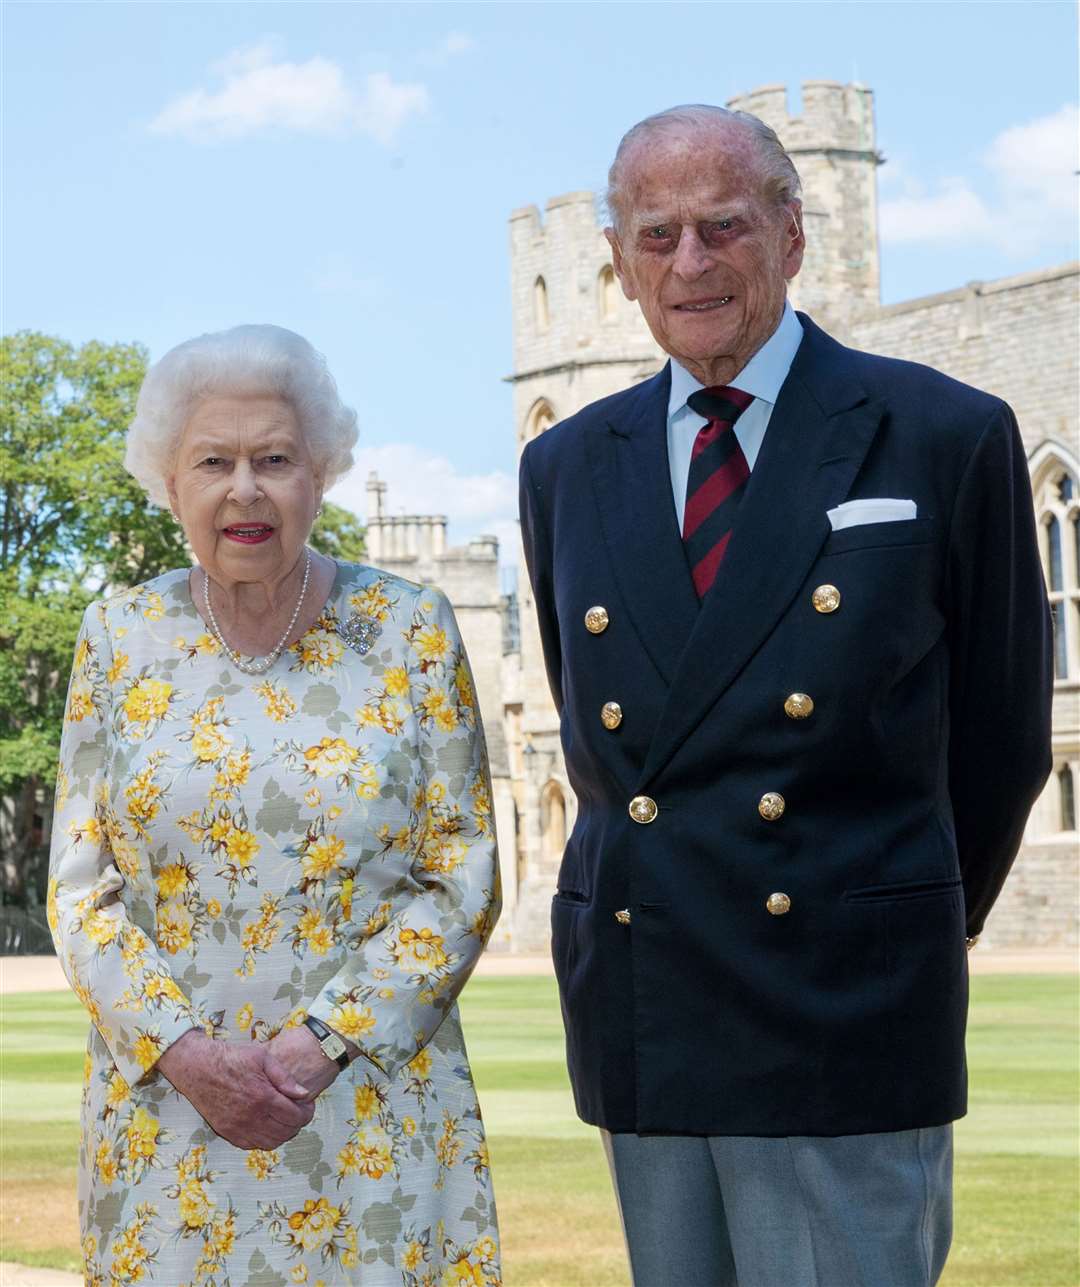 The Queen and Duke of Edinburgh announced that they had received the Covid-19 vaccine (Steve Parsons/PA)